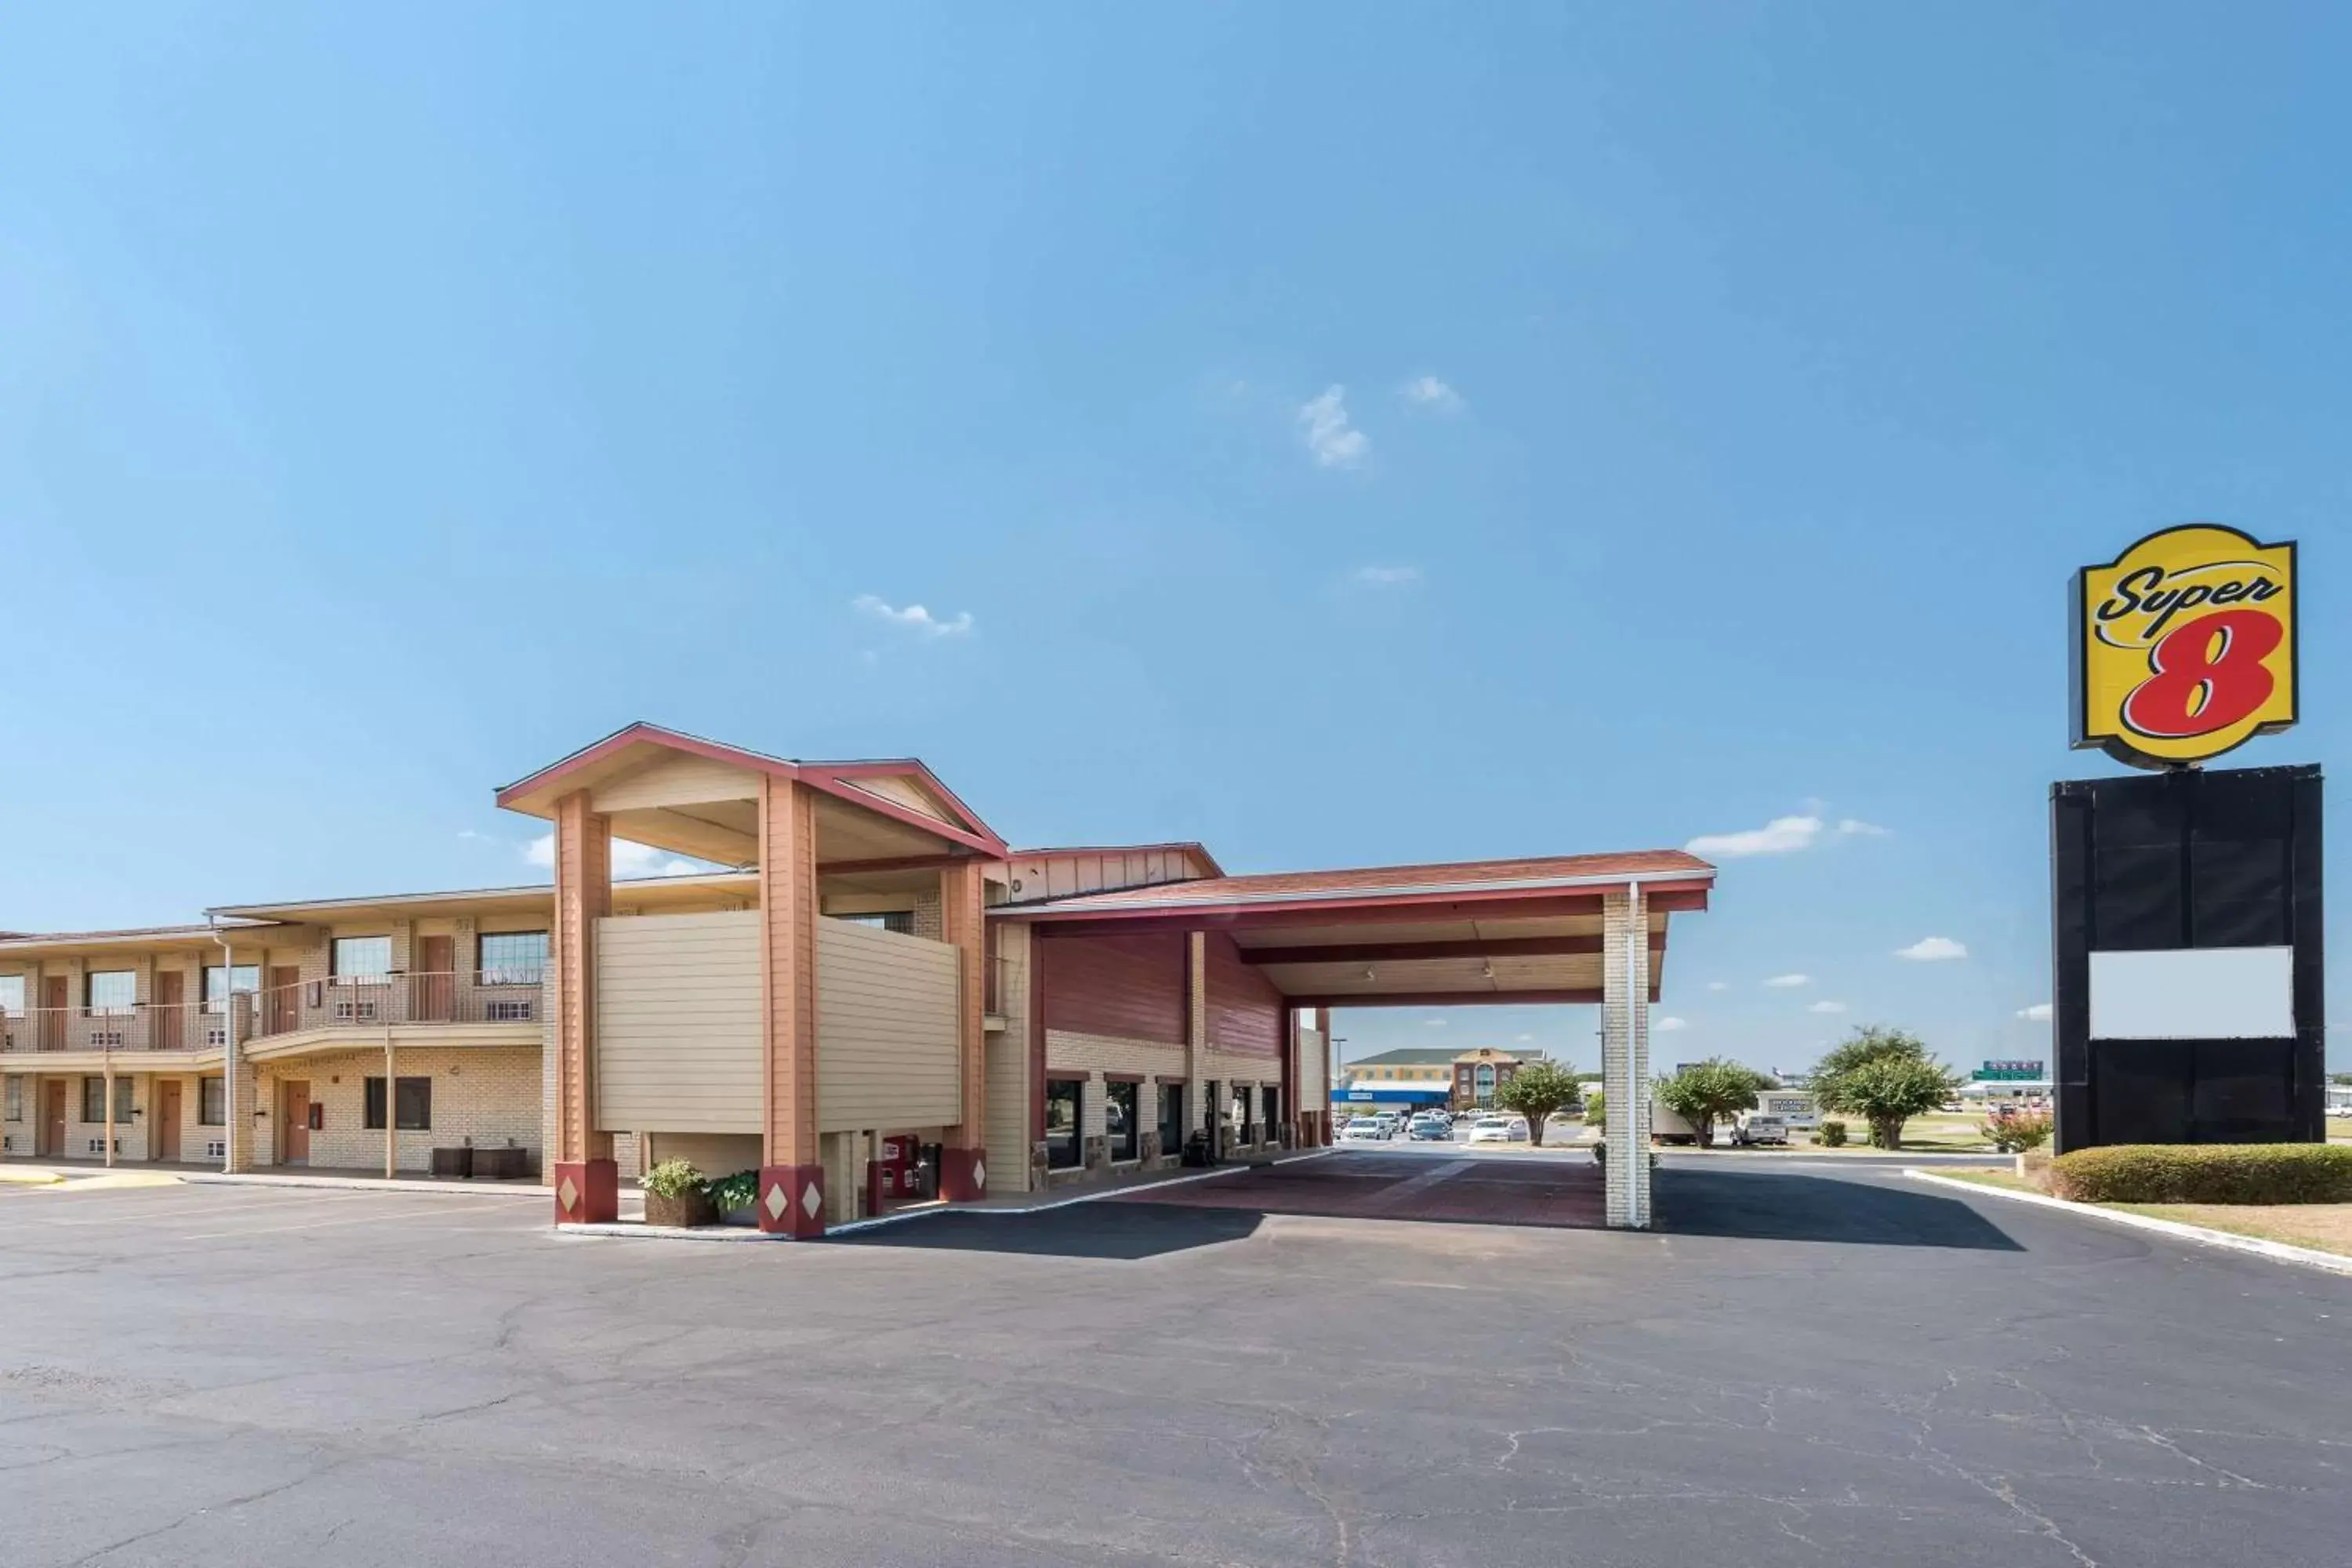 Property Building in Super 8 by Wyndham Waco/Mall area TX